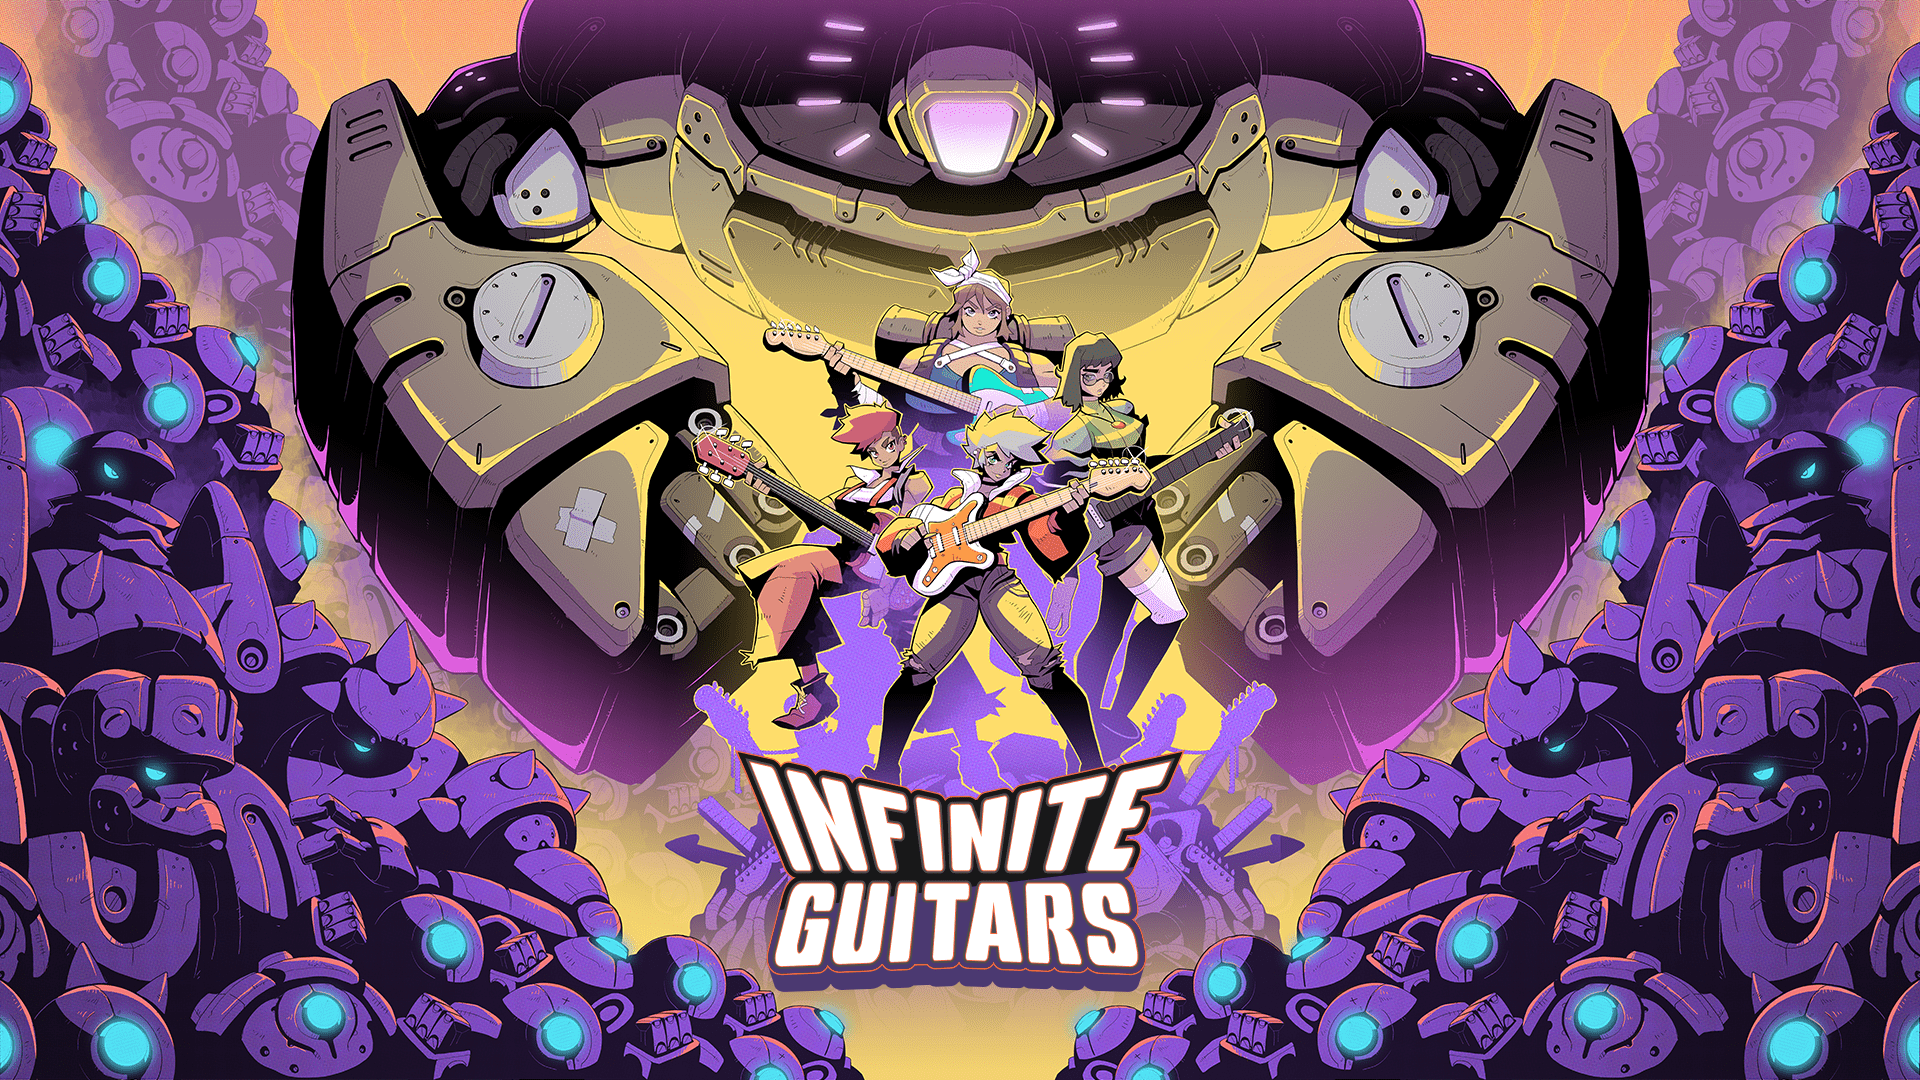 #
      INFINITE GUITARS launches December 13 for Xbox One, Switch, and PC